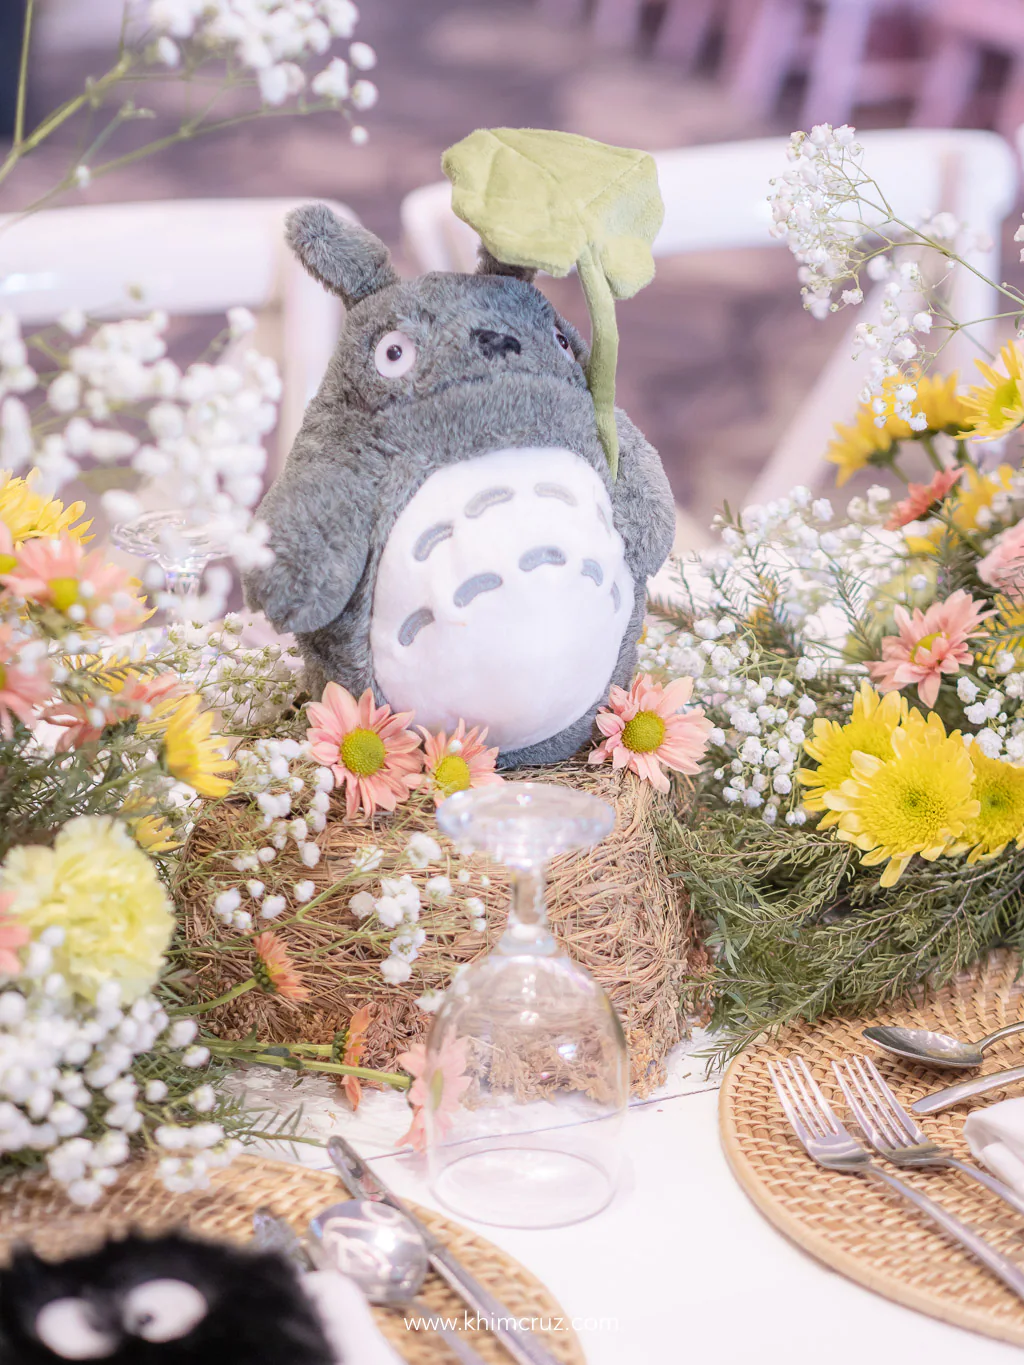 Totoro table centerpiece with floral works on a Totoro-themed kid's birthday party